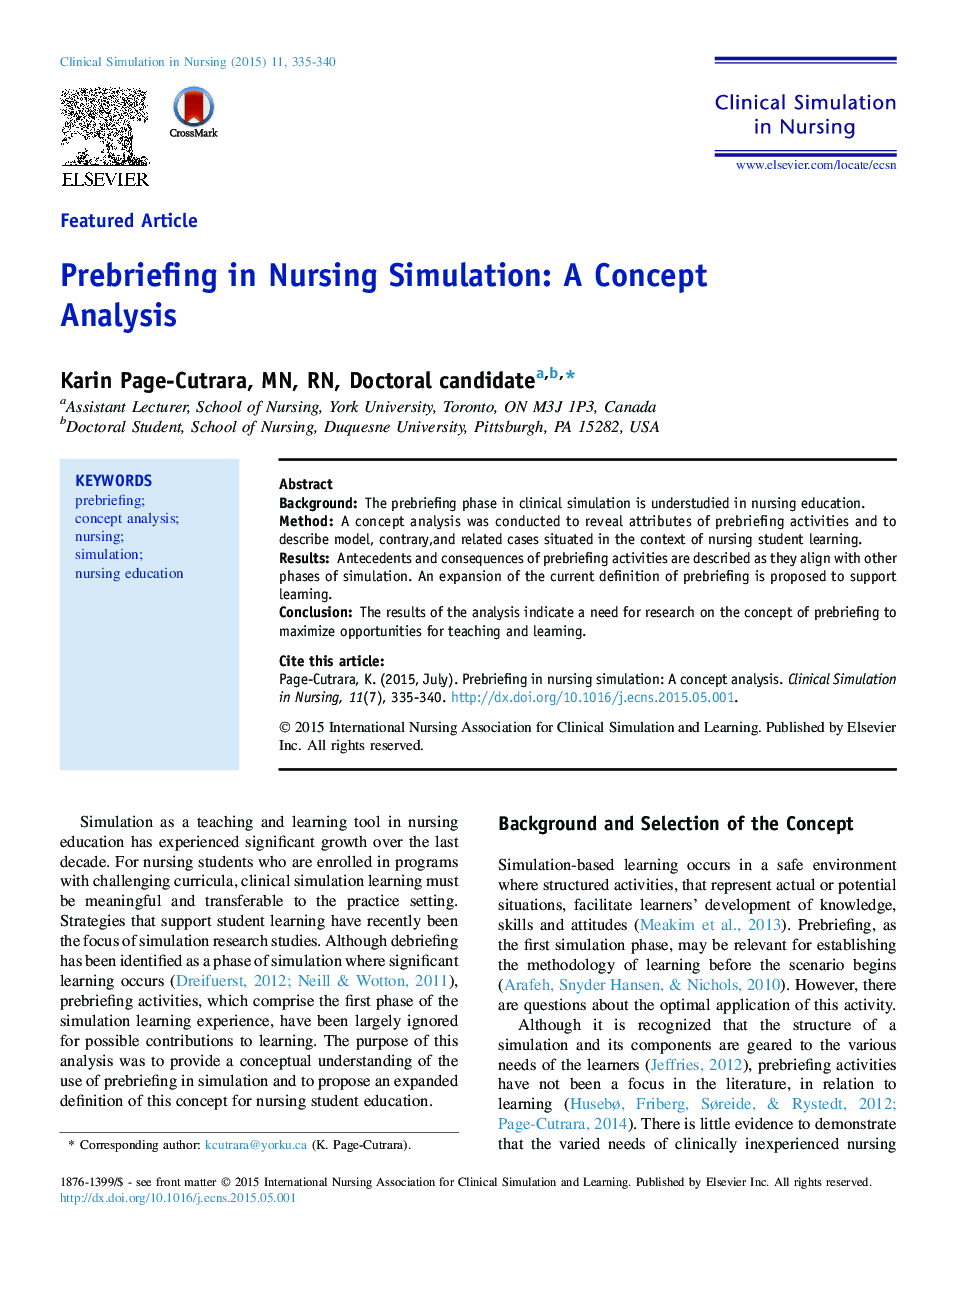 Prebriefing in Nursing Simulation: A Concept Analysis